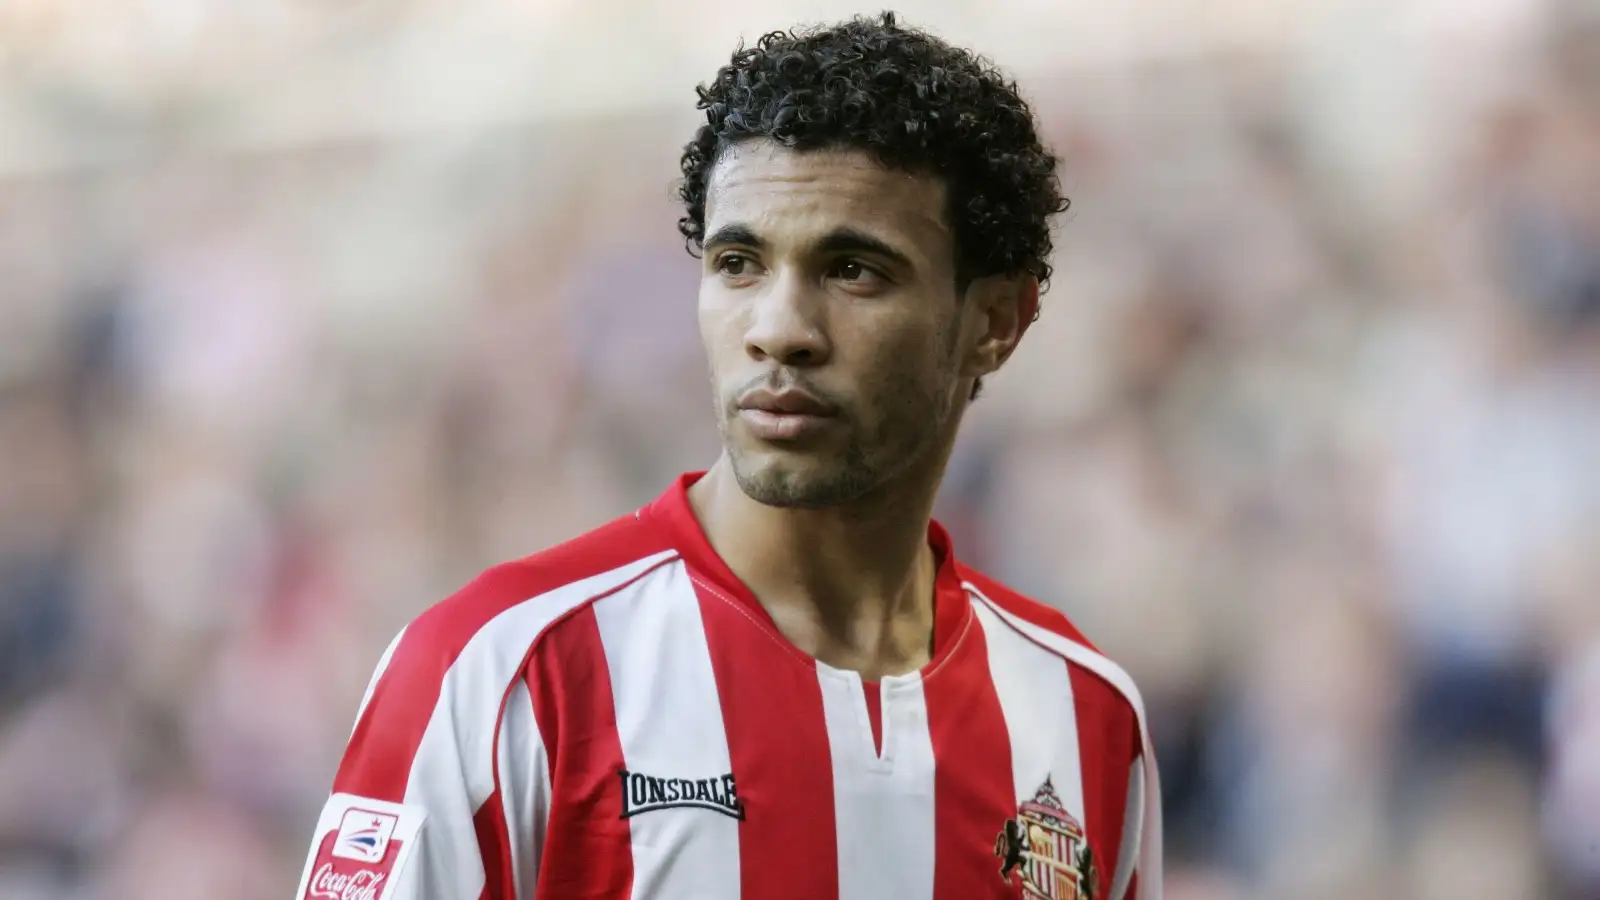 Carlos Edwards on Wrexham, Sunderland & Ipswich: ‘Roy Keane has a soft side people don’t see’